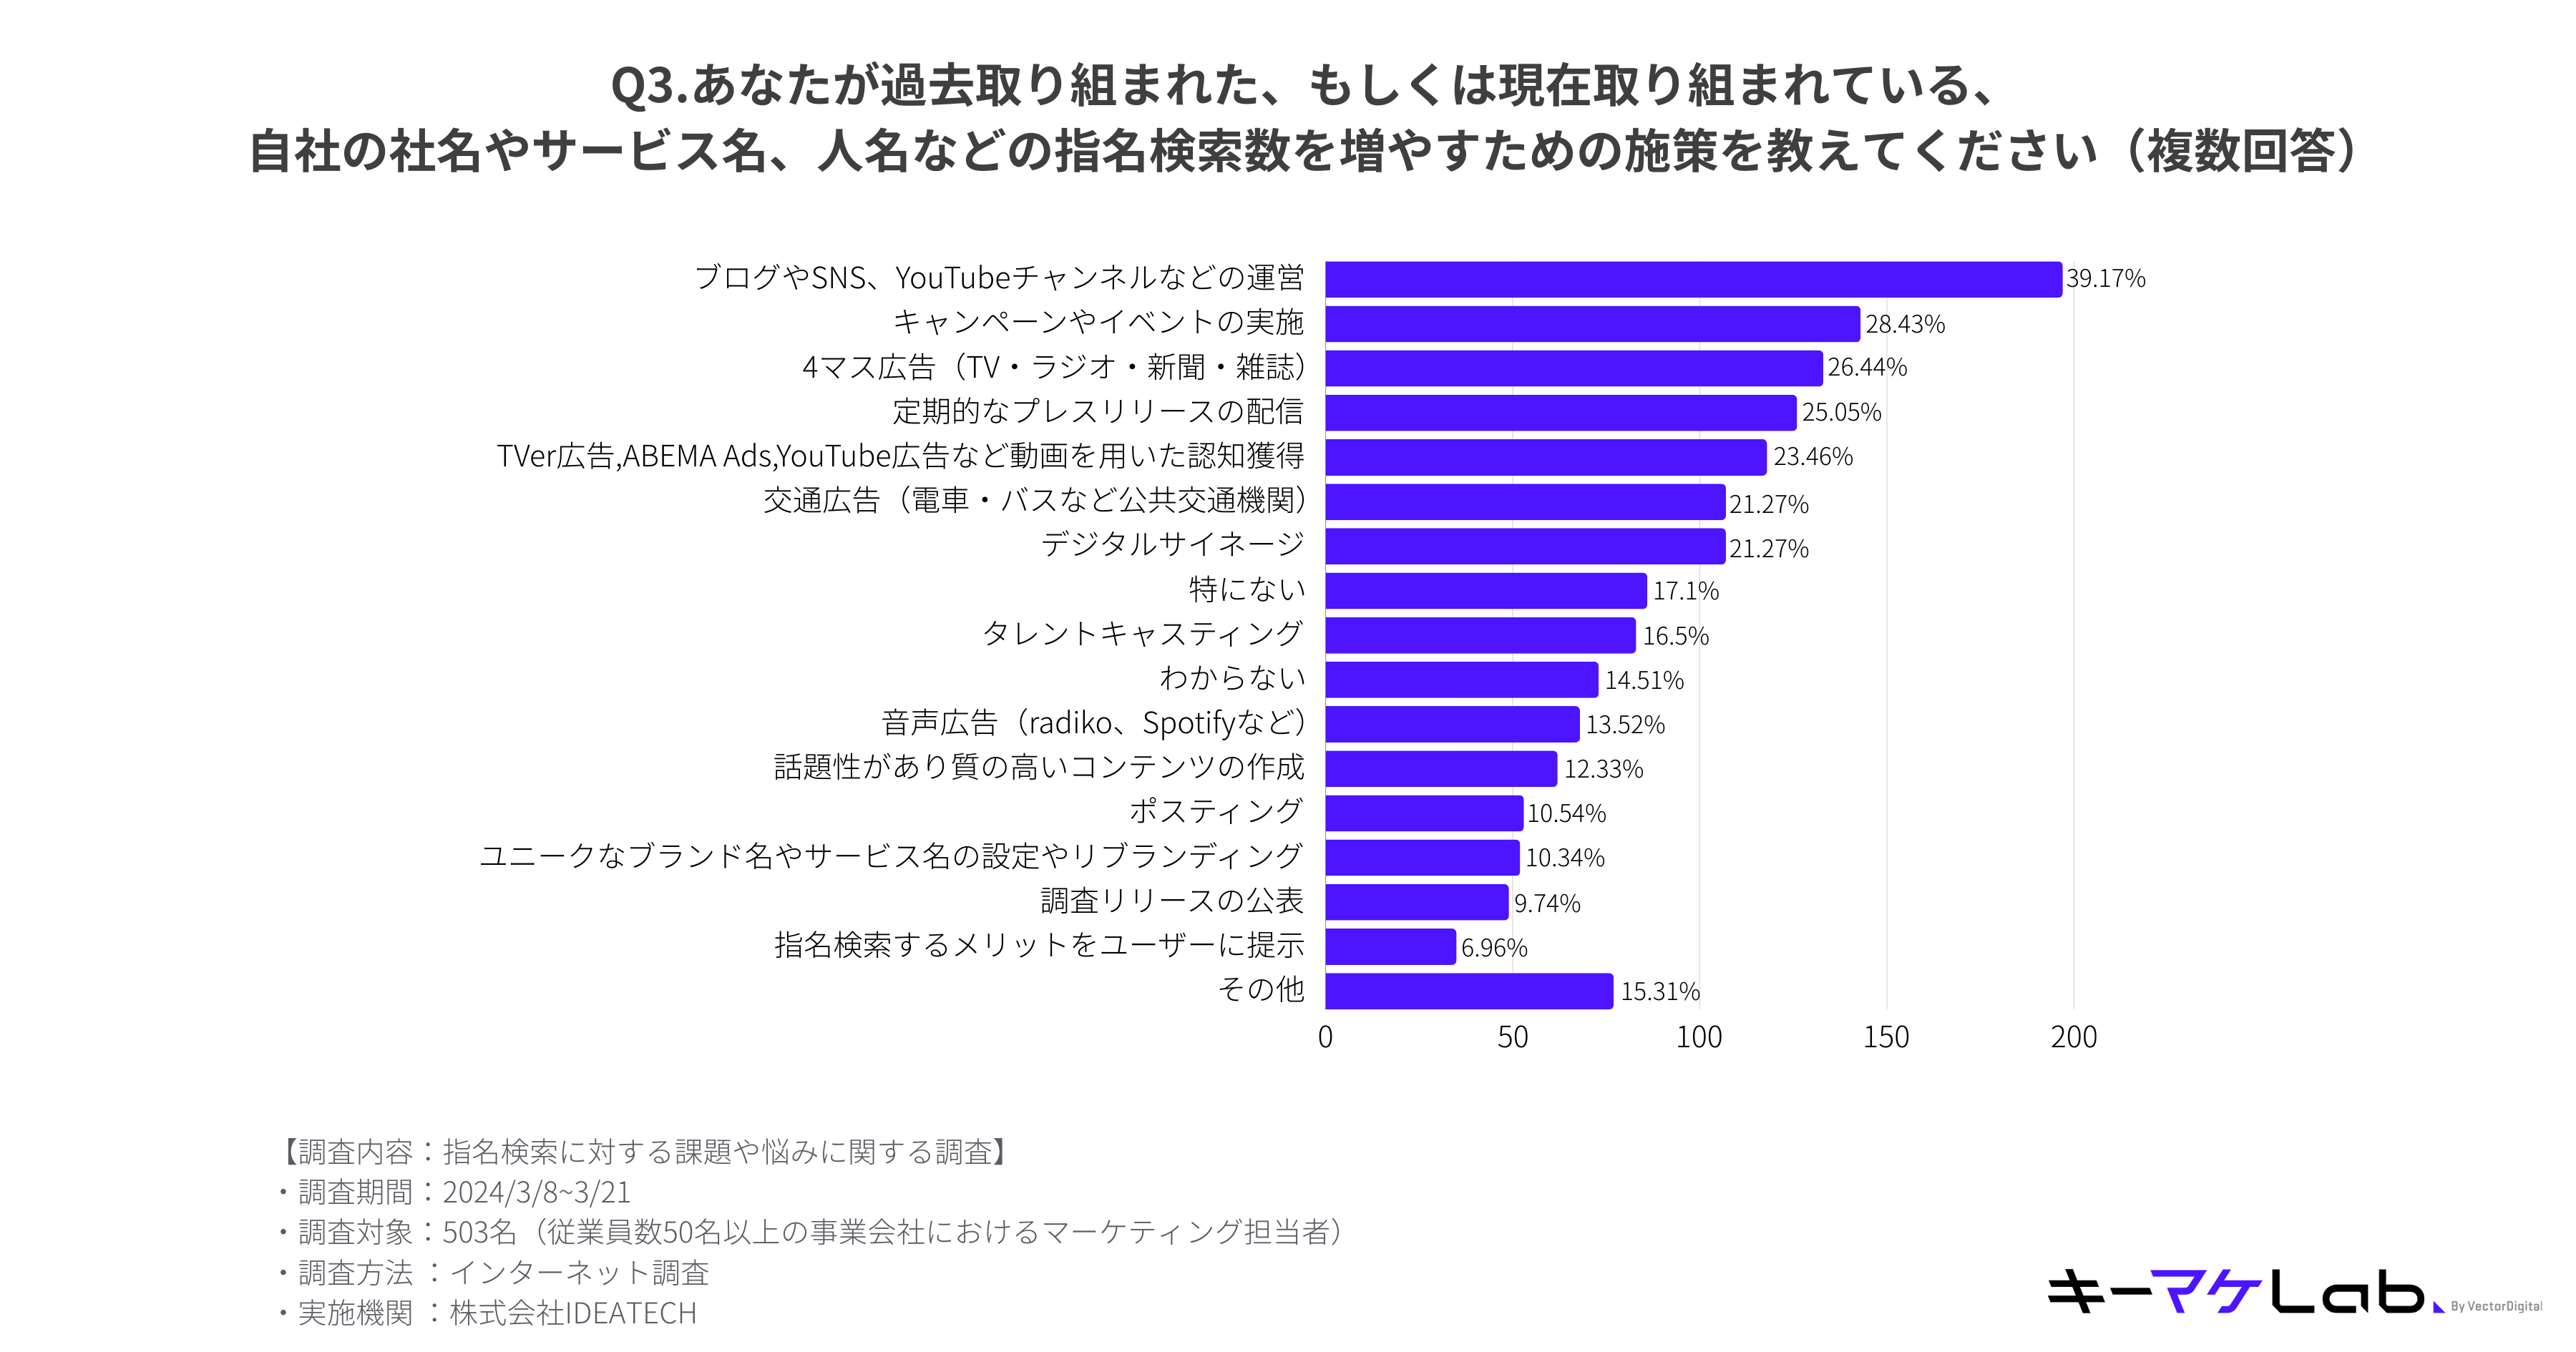 When asked about ``measures that have been taken in the past or are currently being taken to increase the number of named searches,'' 39.17% said ``operating a blog, SNS, YouTube channel, etc.''

The runner-up was "Implementation of campaigns and events" at 28.43%, and "4-mass advertising (TV, radio, newspapers, magazines)" at 26.44%.